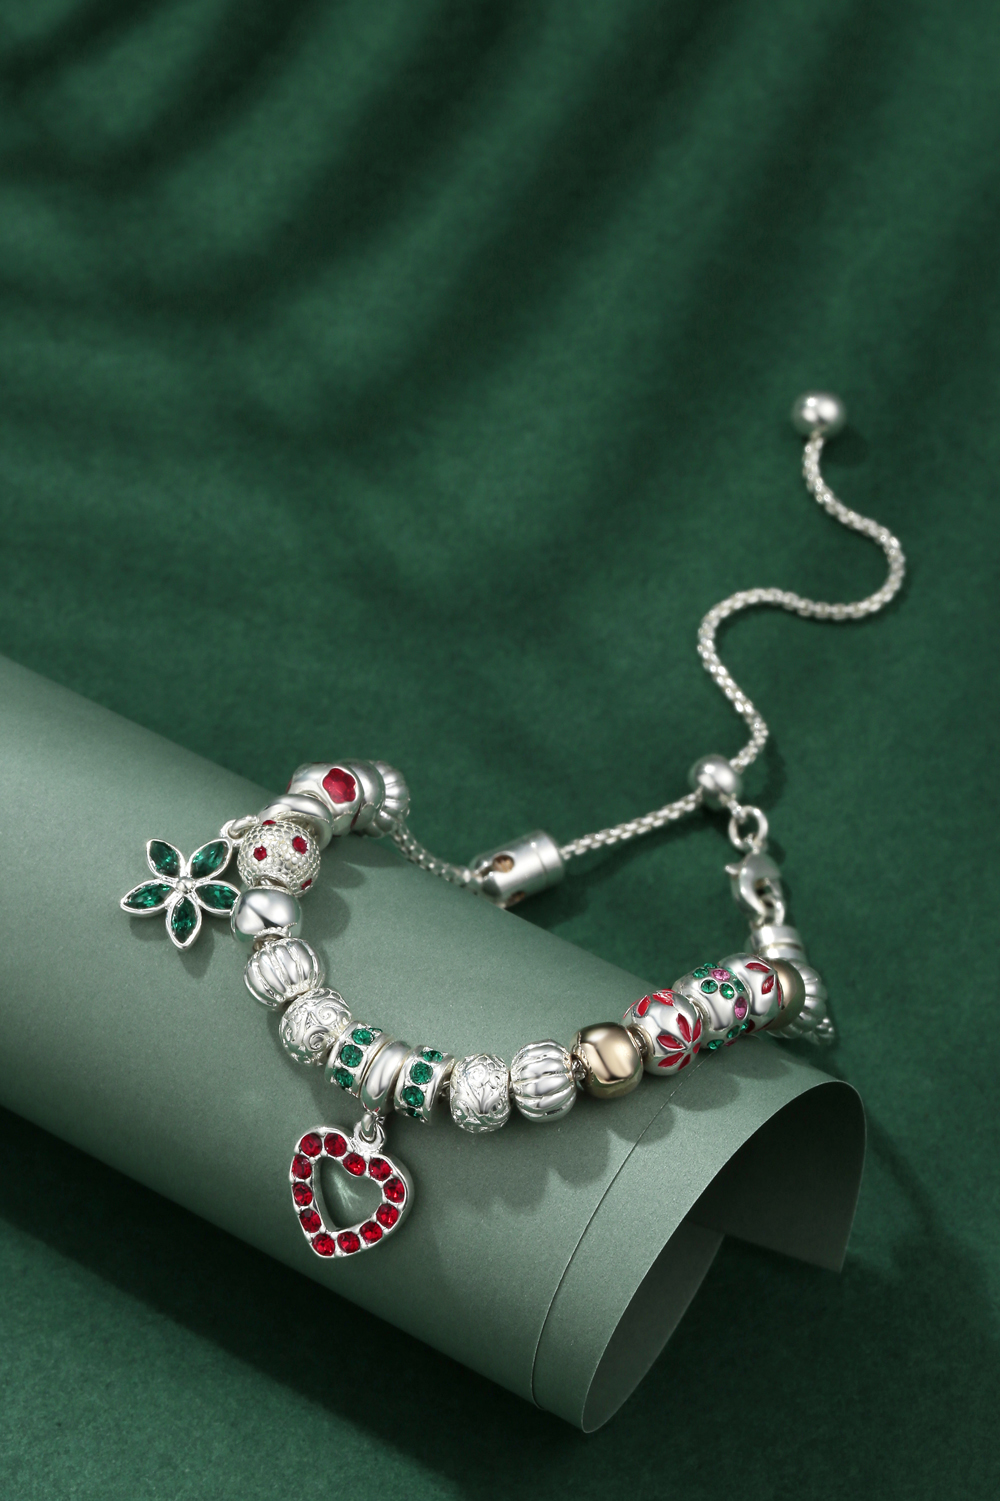 Get your style with this bracelet pandora